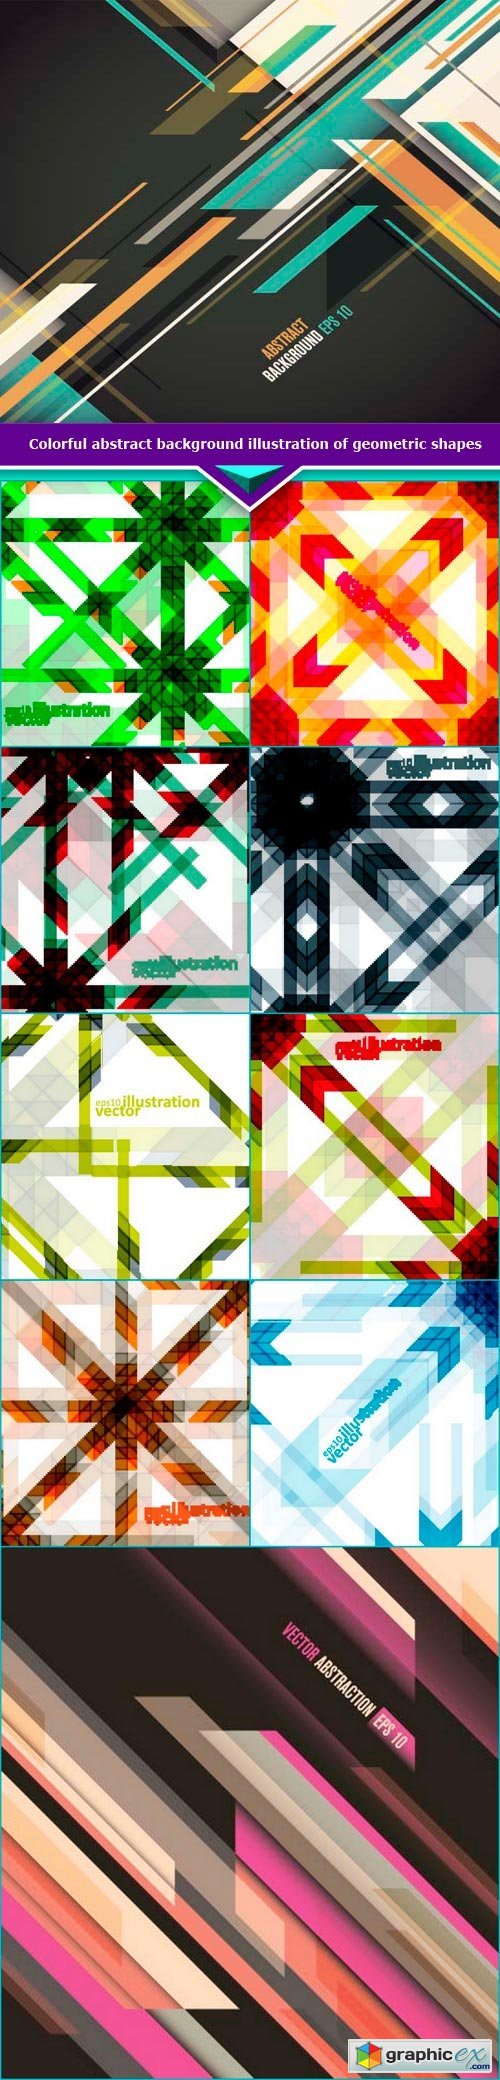 Colorful abstract vector background illustration of geometric shapes 10x EPS